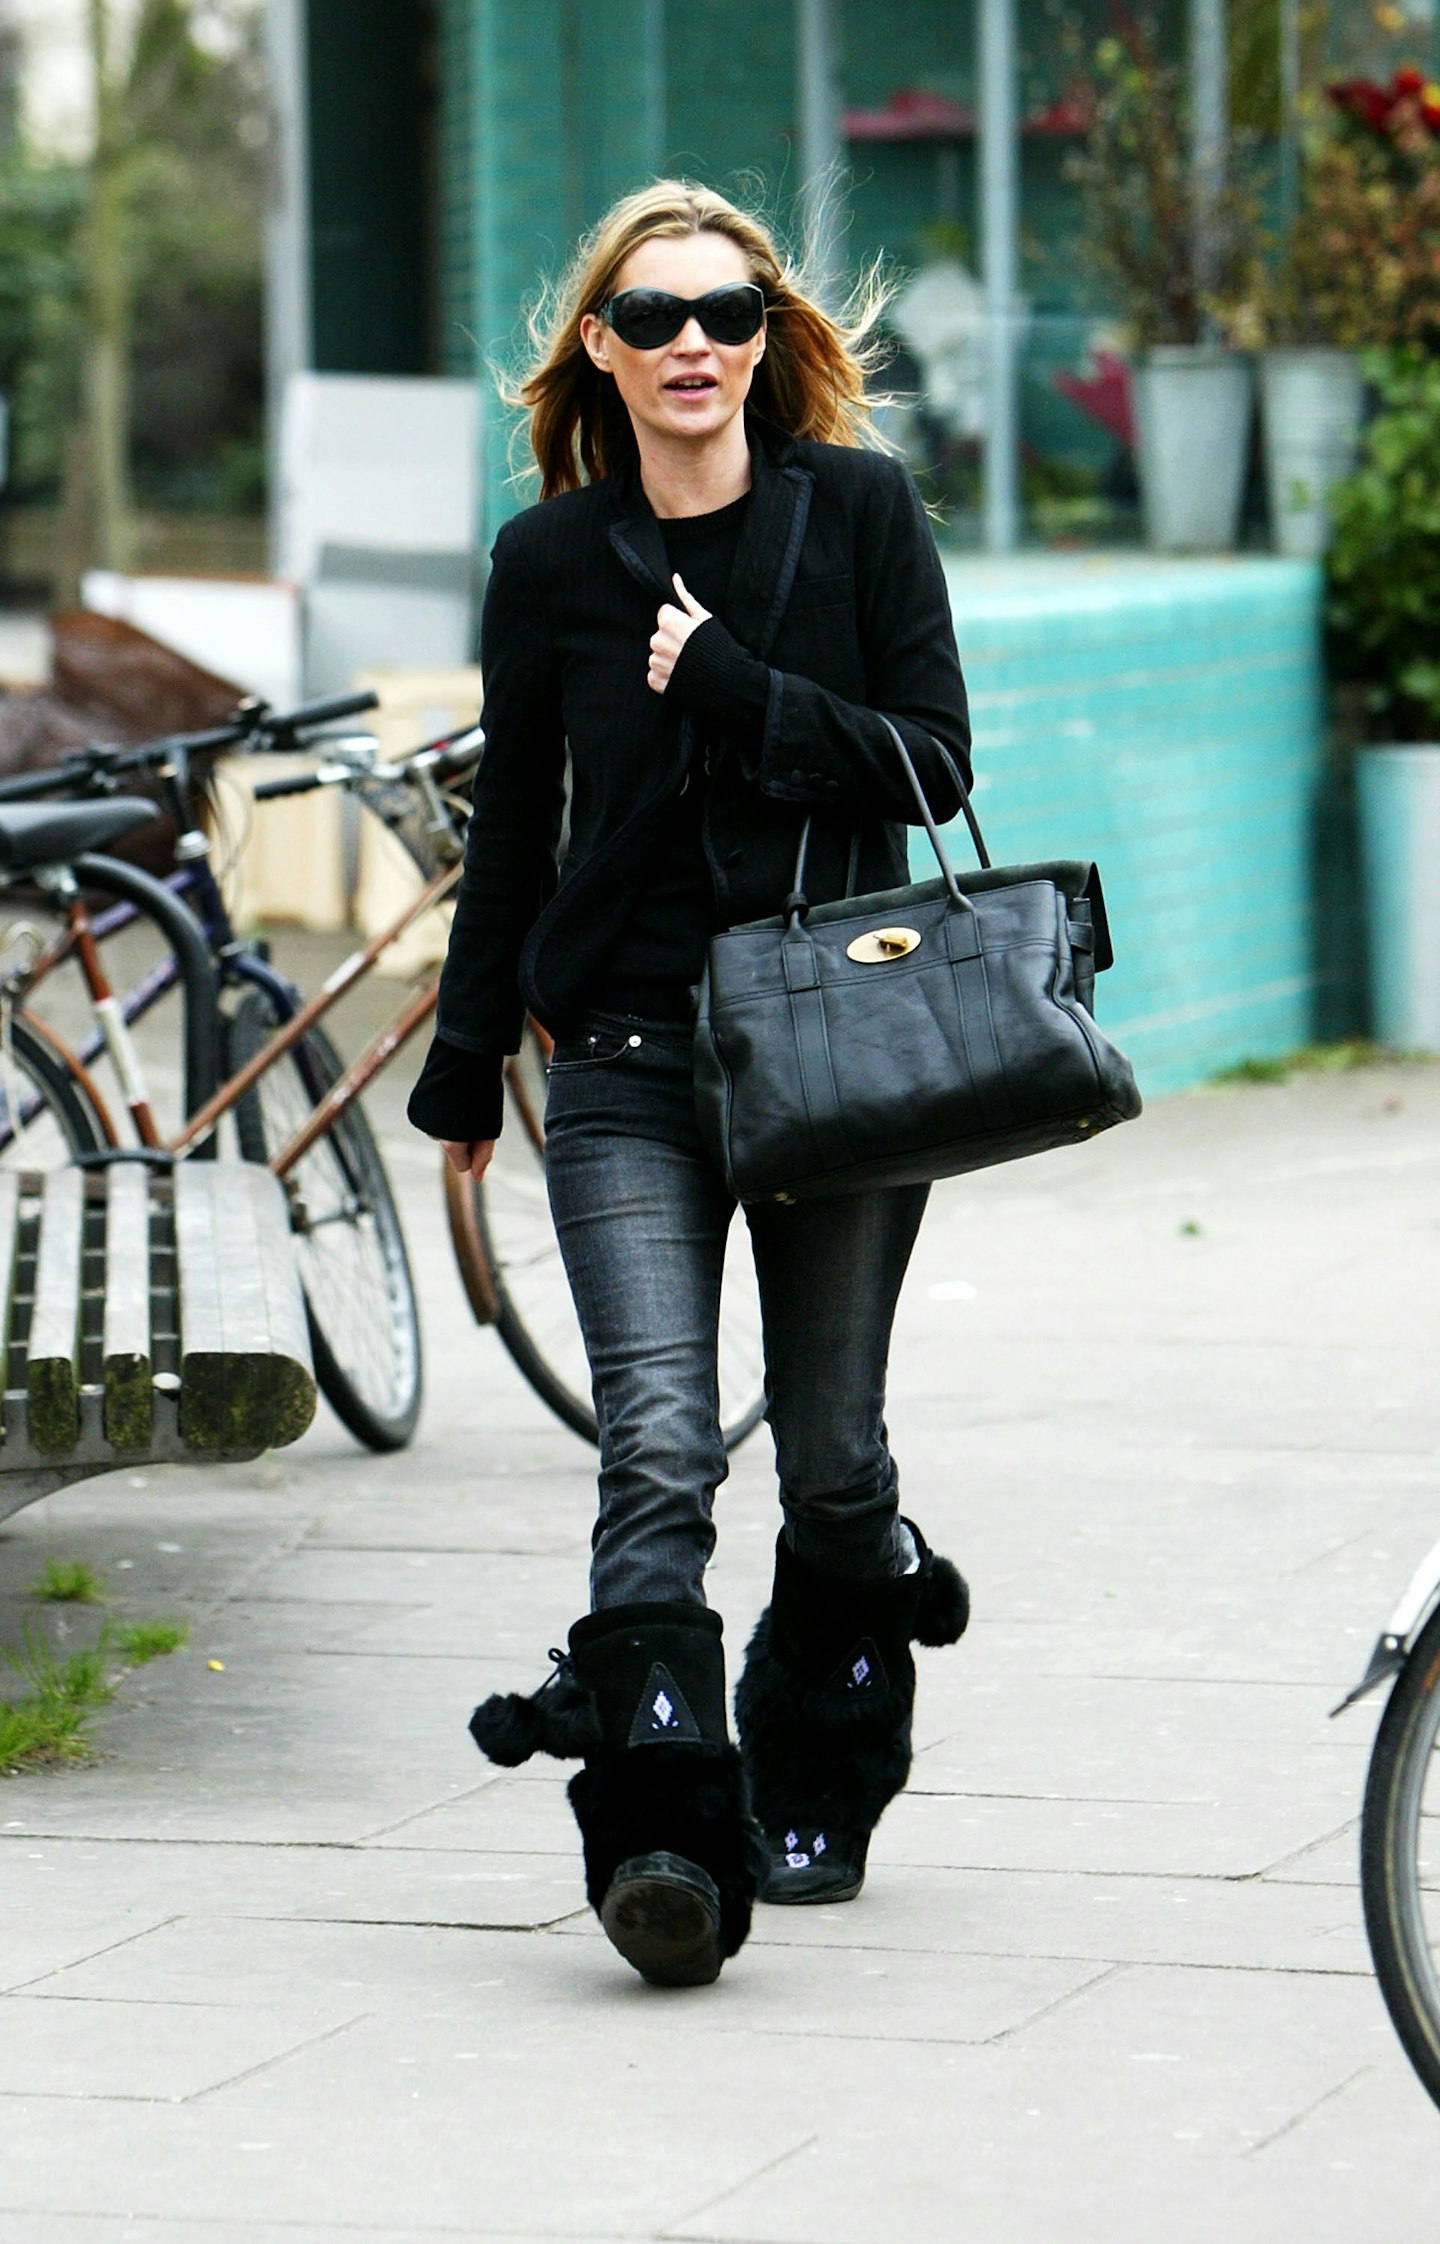 6 Ways Celebrities Are Wearing Uggs and Leggings (That Are Still Stylish)